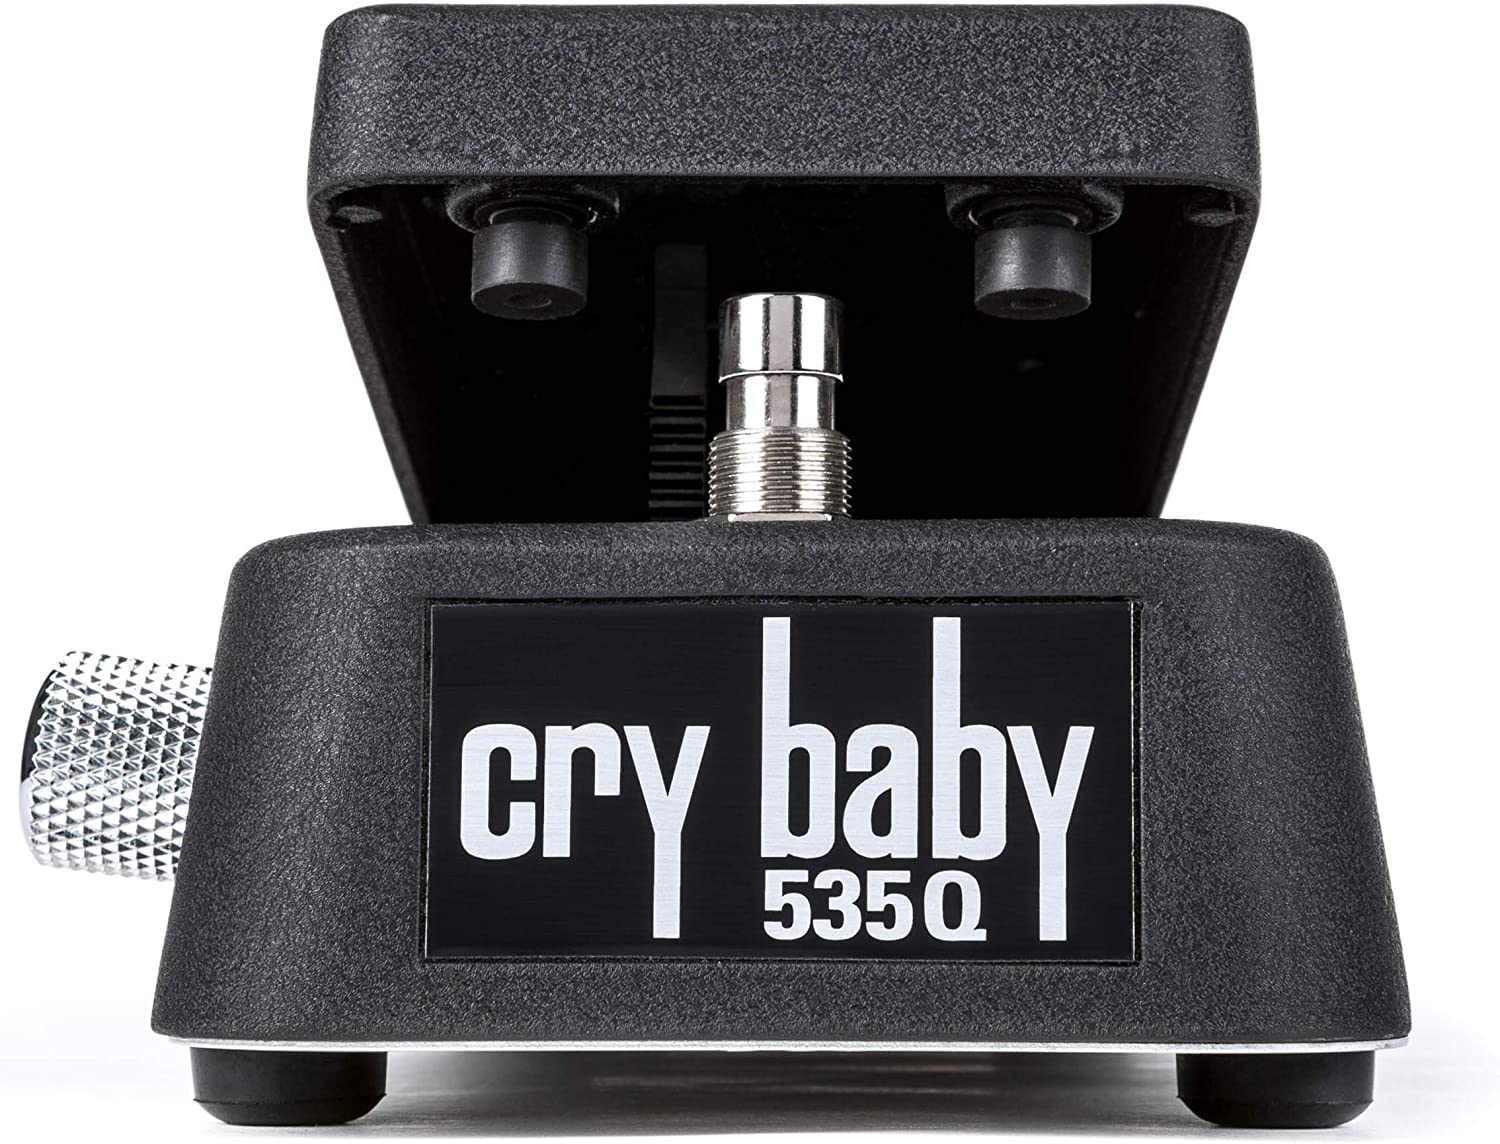 Dunlop 535Q Cry Baby Multi-Wah Pedal on a white background